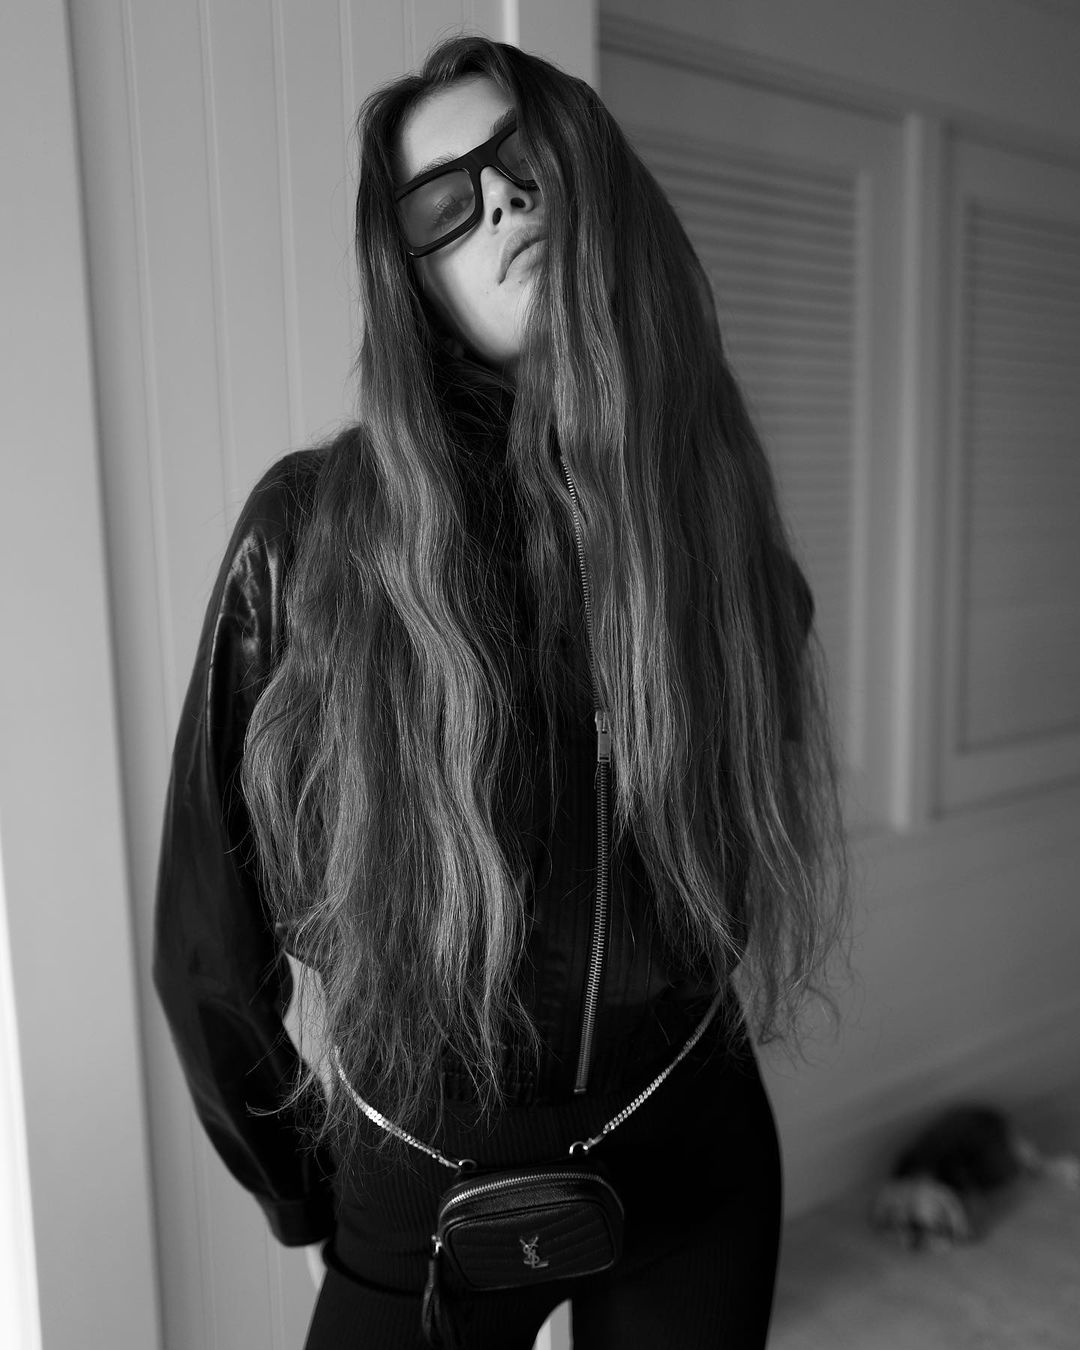 Photos n°1 : Kaia Gerber is Wigging Out!